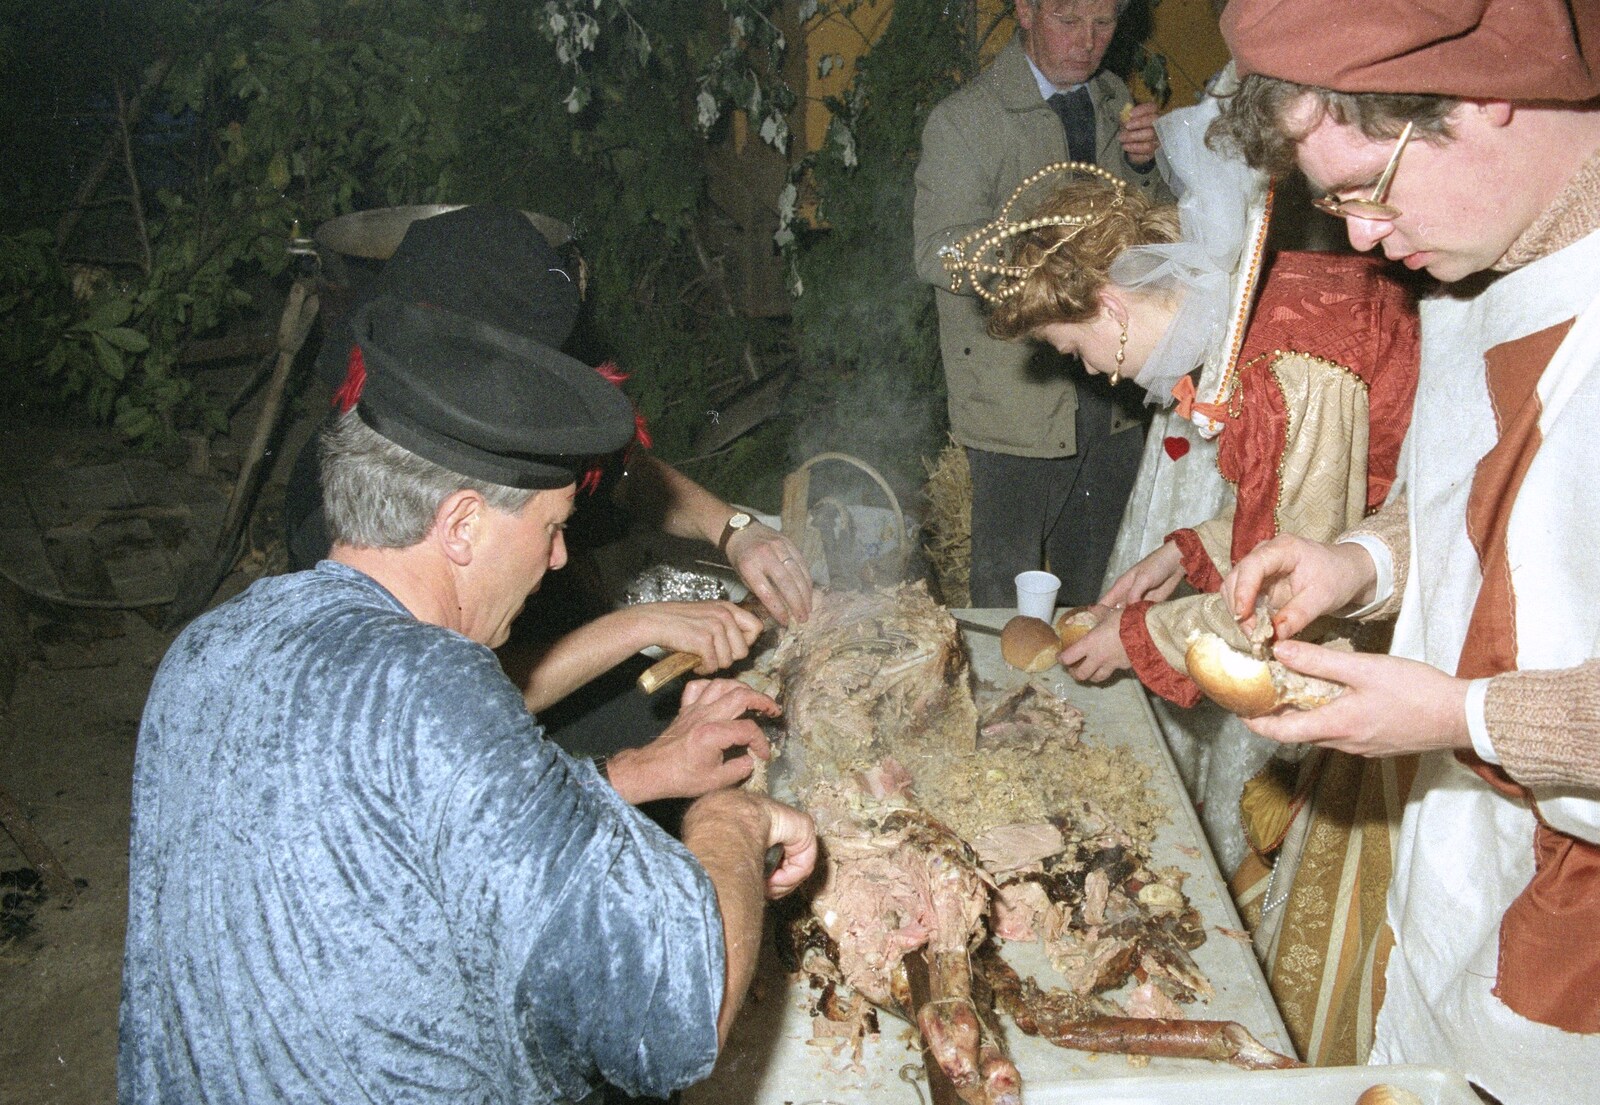 The slow-roast lamb is scoffed from A Mediaeval Birthday Party, Starston, Norfolk - 27th July 1990